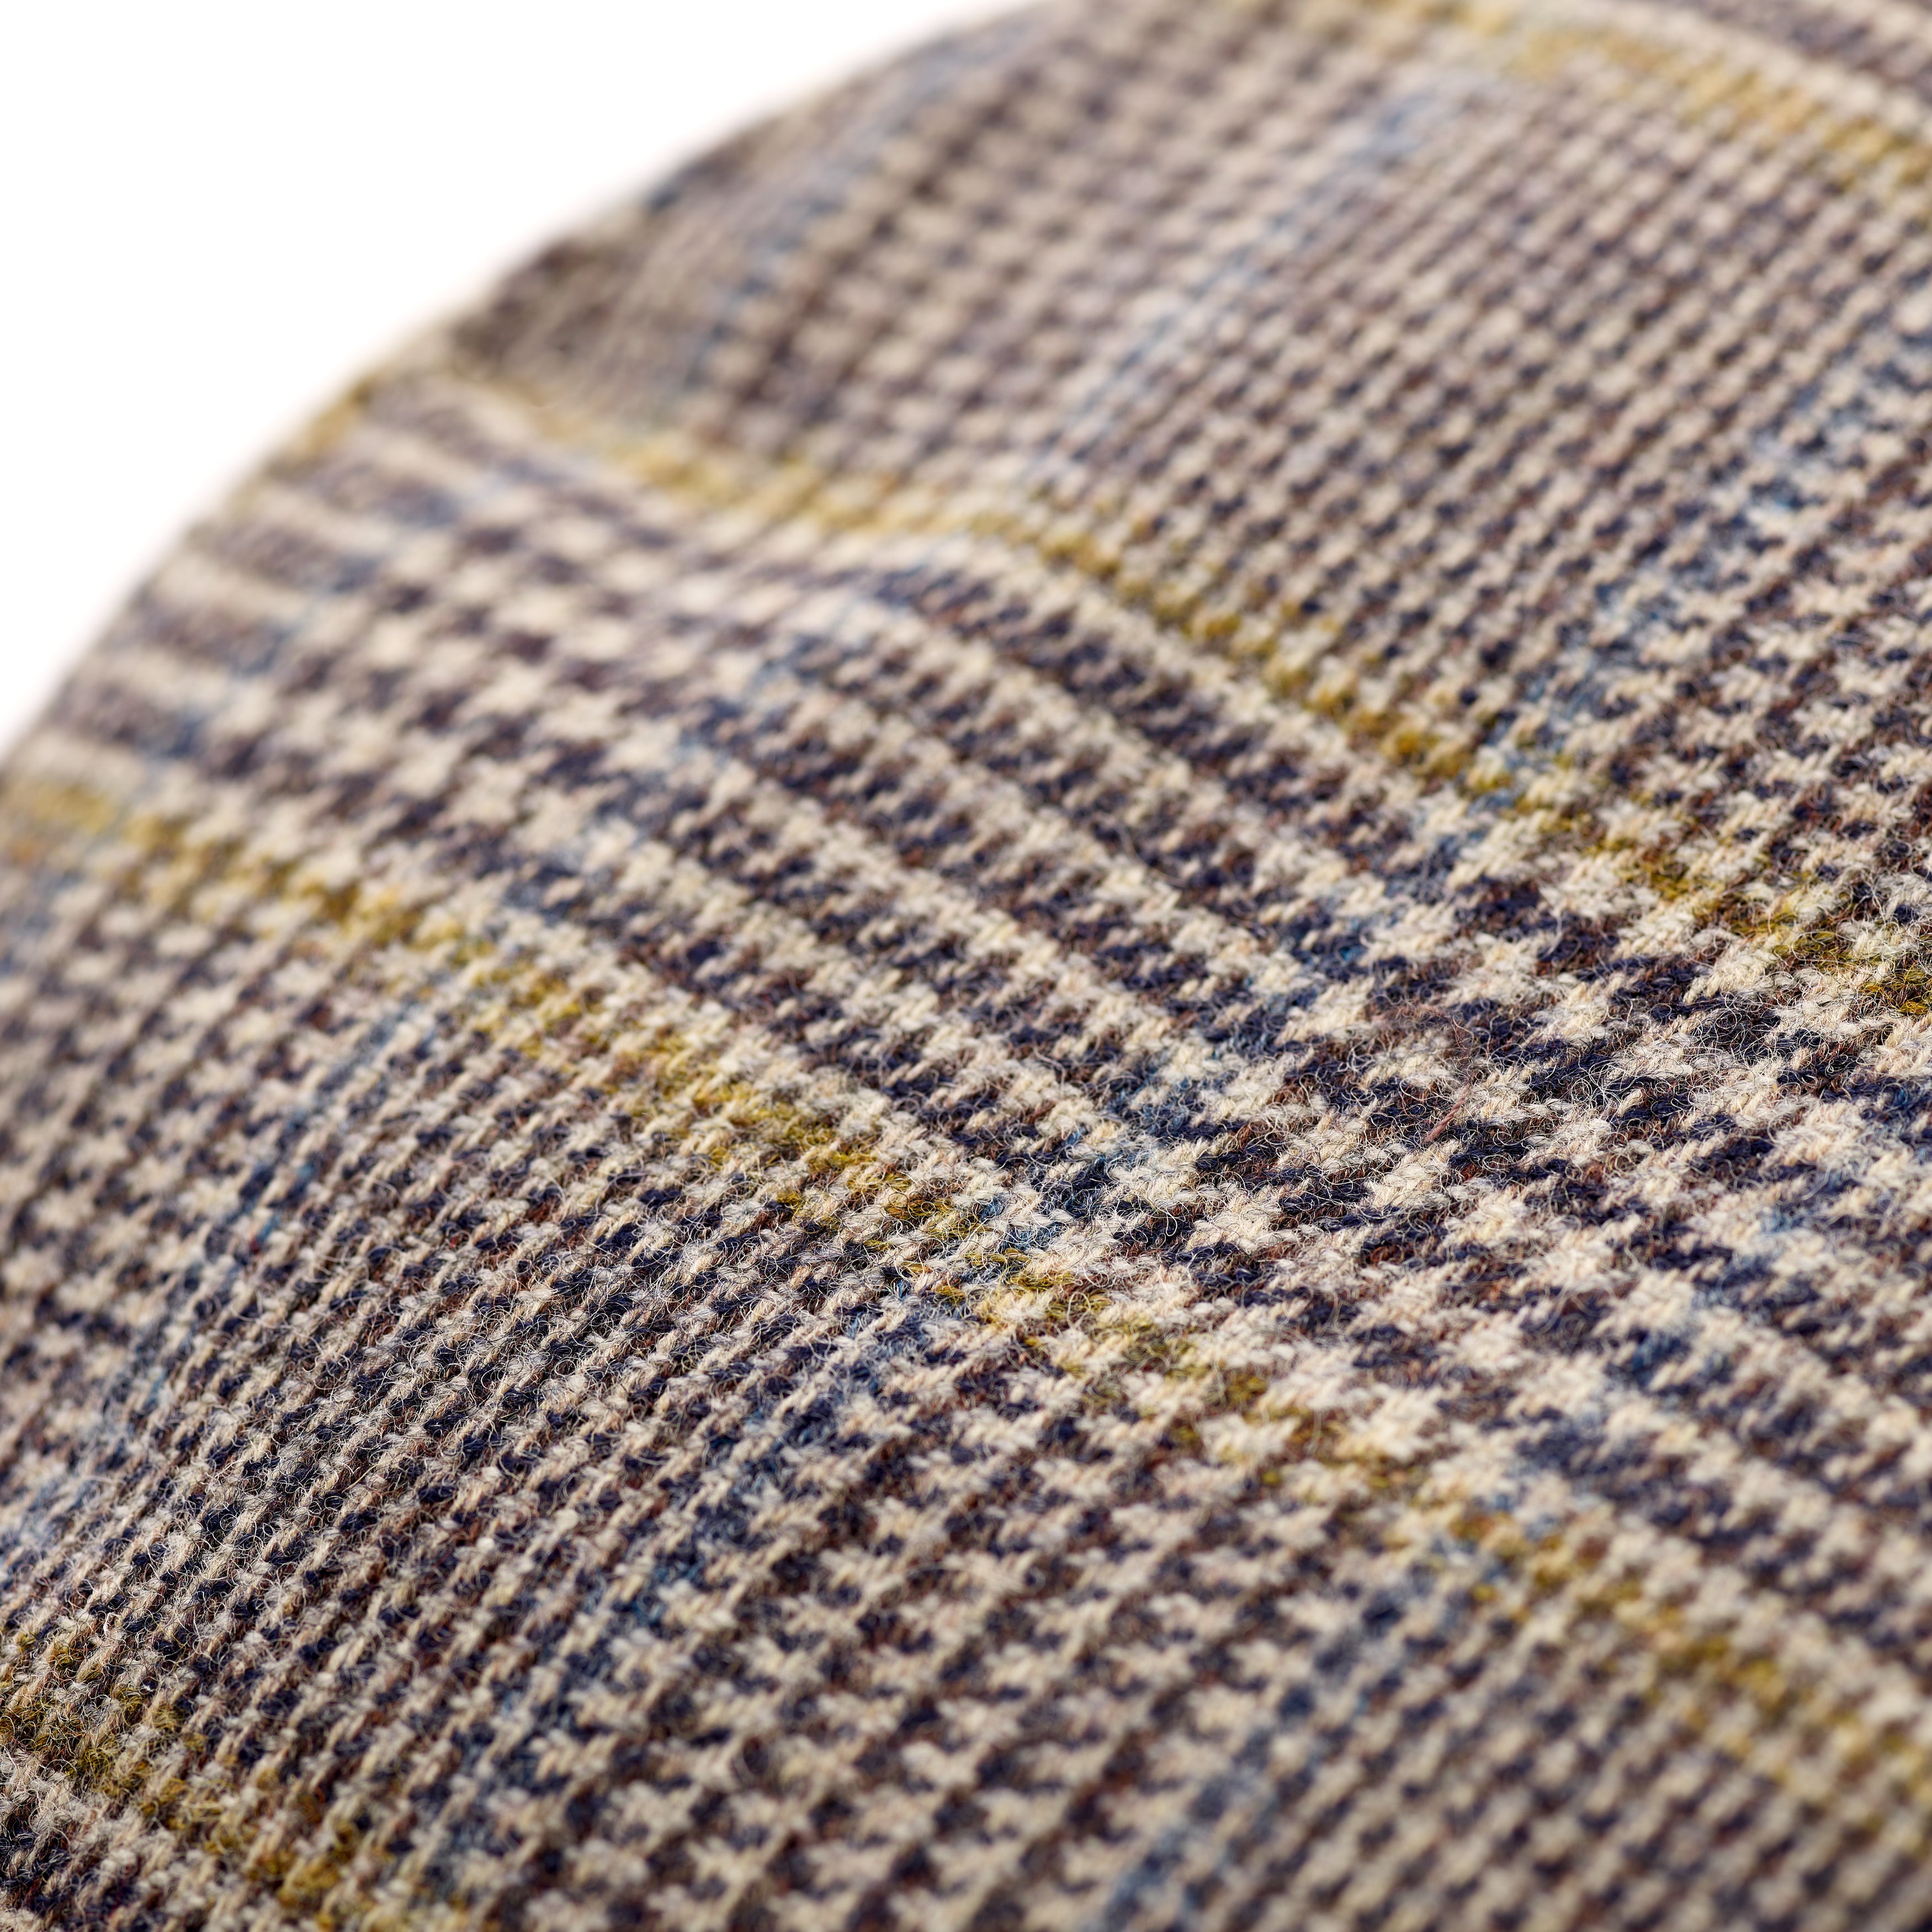 Fox Tweed Cap With Snap Brim In Glen check with Blue and Gold Deco Crown